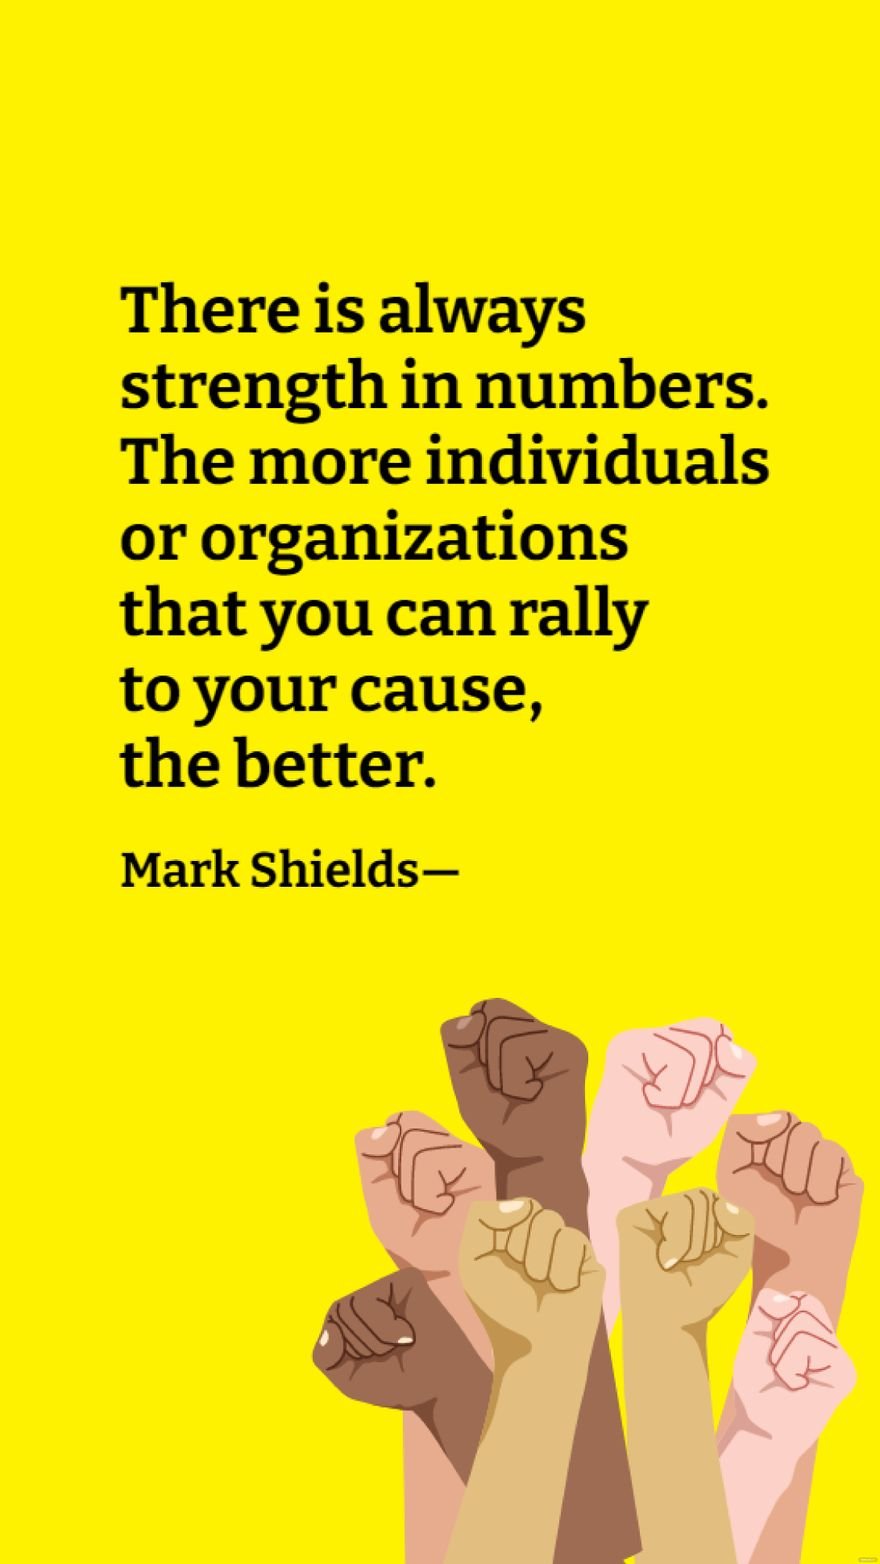 Free Mark Shields - There is always strength in numbers. The more individuals or organizations that you can rally to your cause, the better in JPG